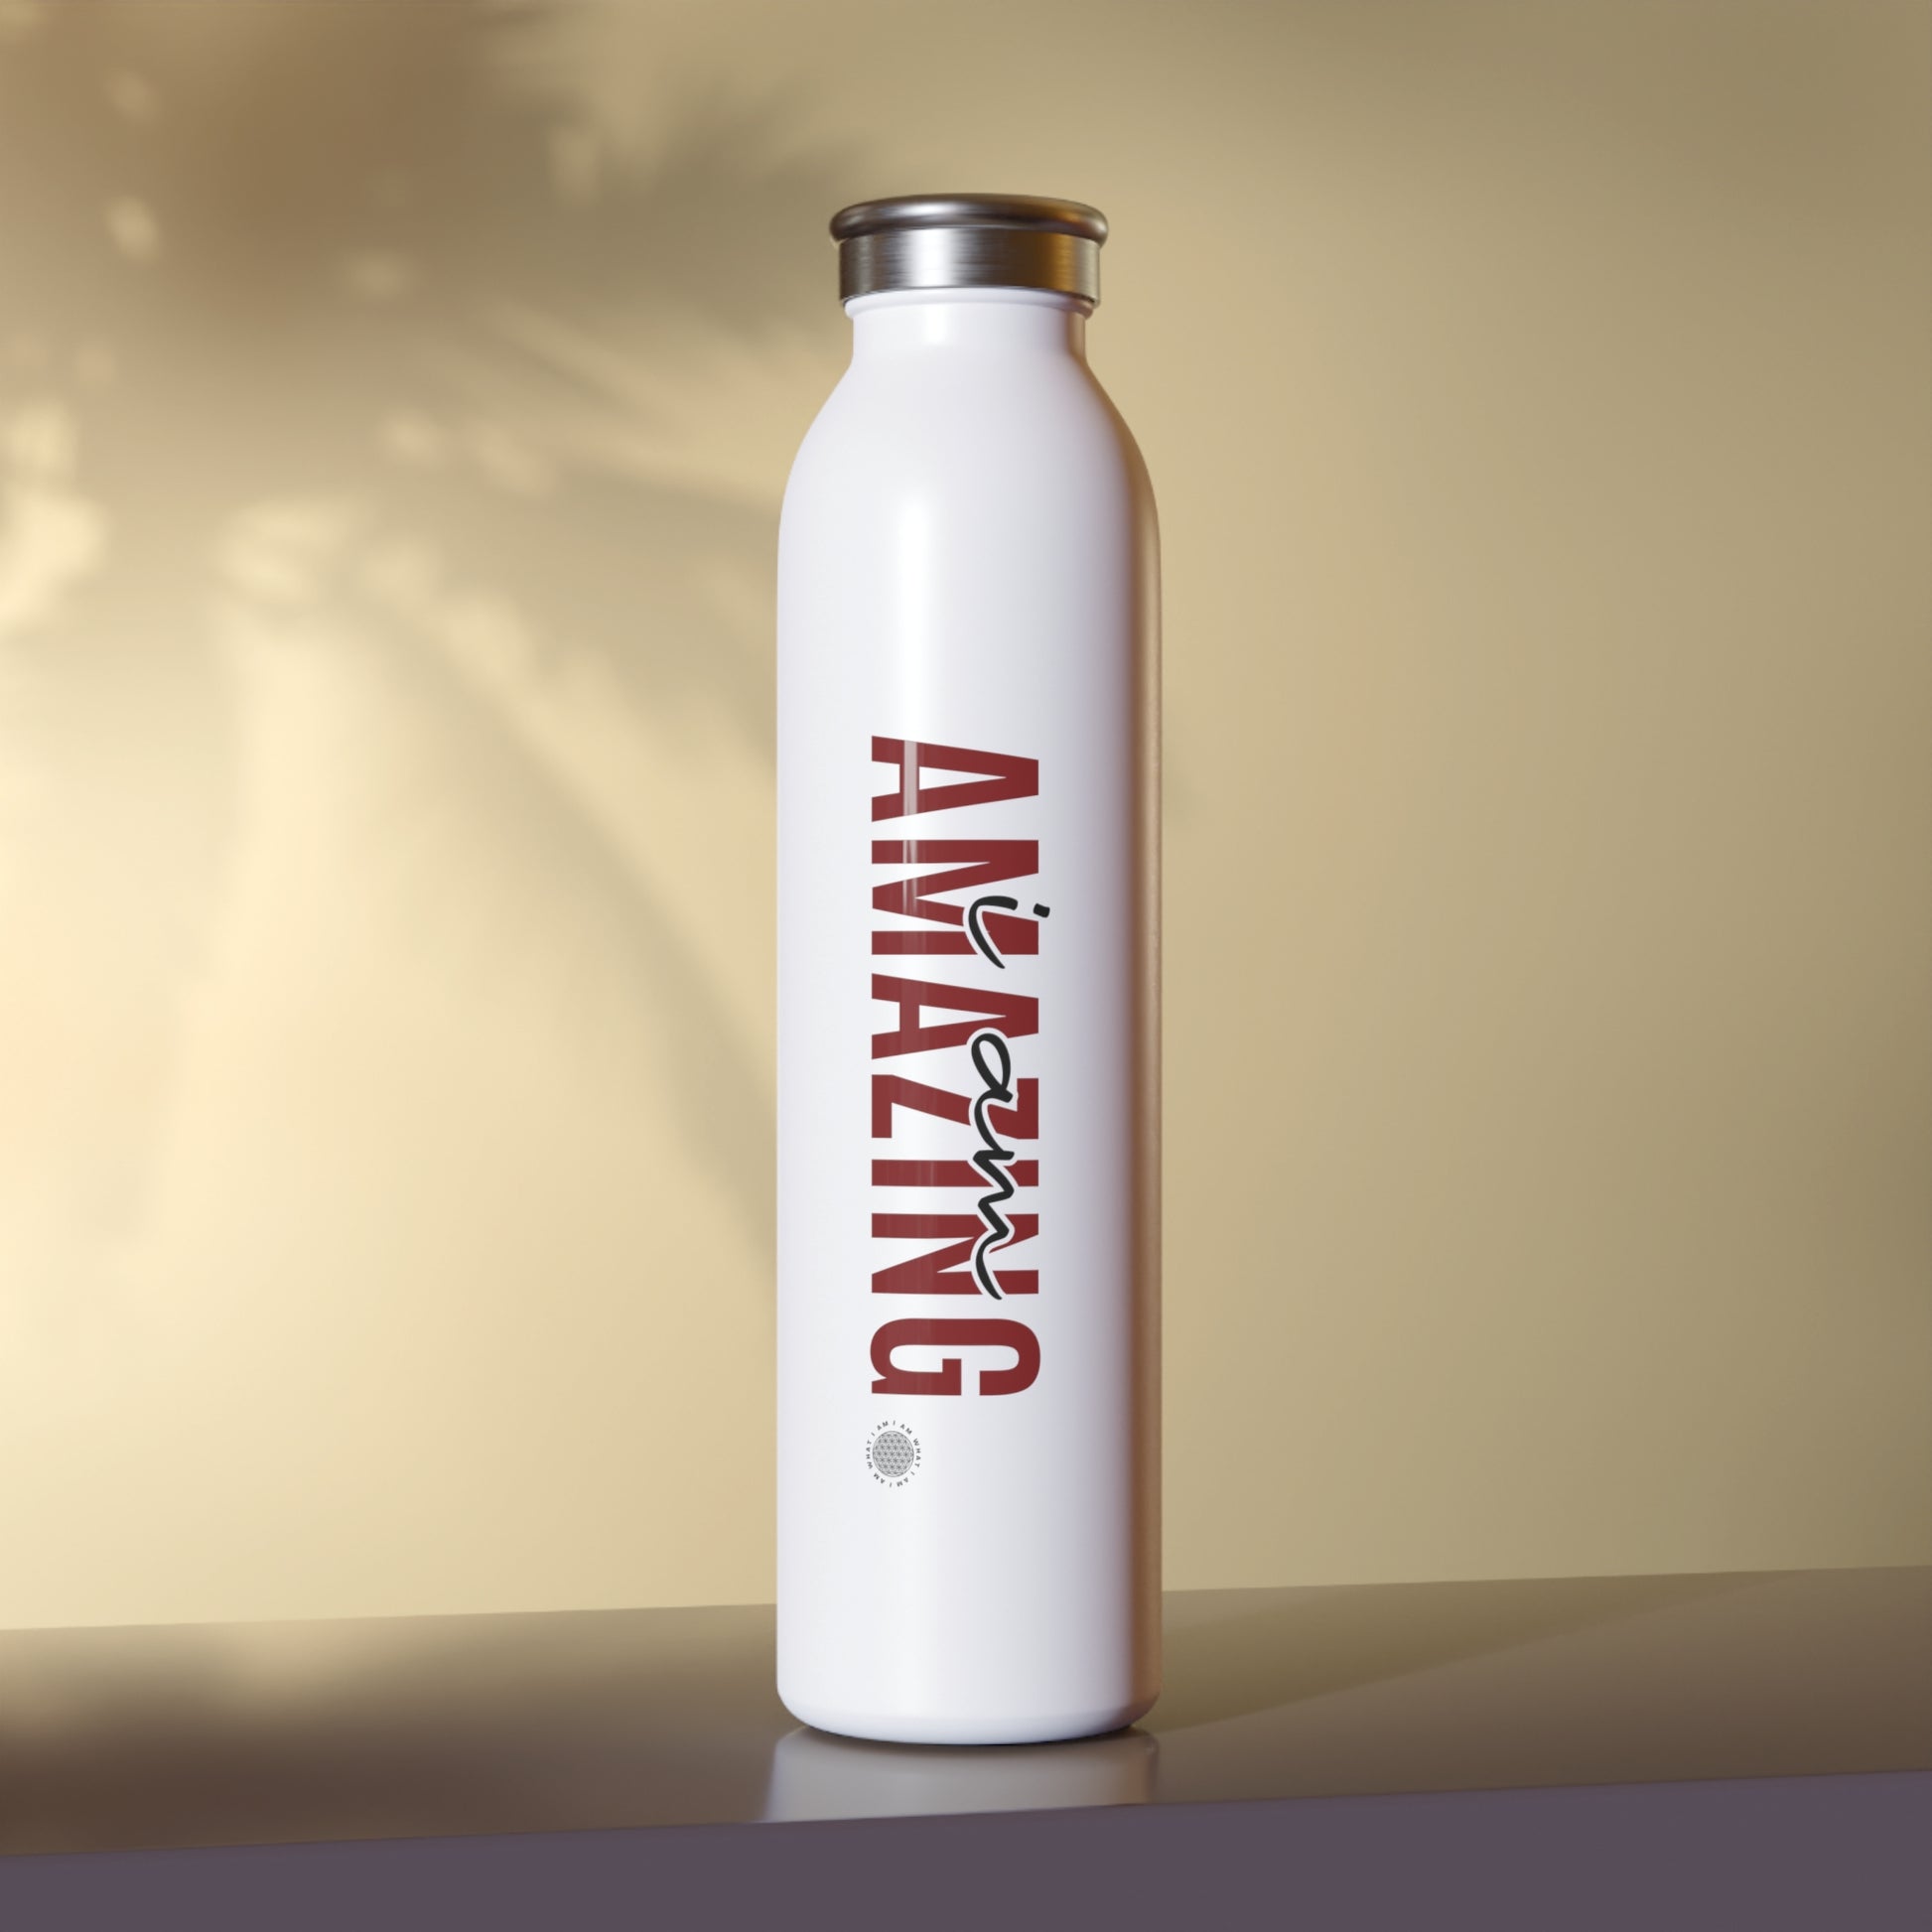 Our I Am Amazing affirmation water bottle is one of our positive affirmations for mental health. Positive thinking keeps our mindset happy and healthy. This personalized water bottle was designed to become your favorite canvas of expression.